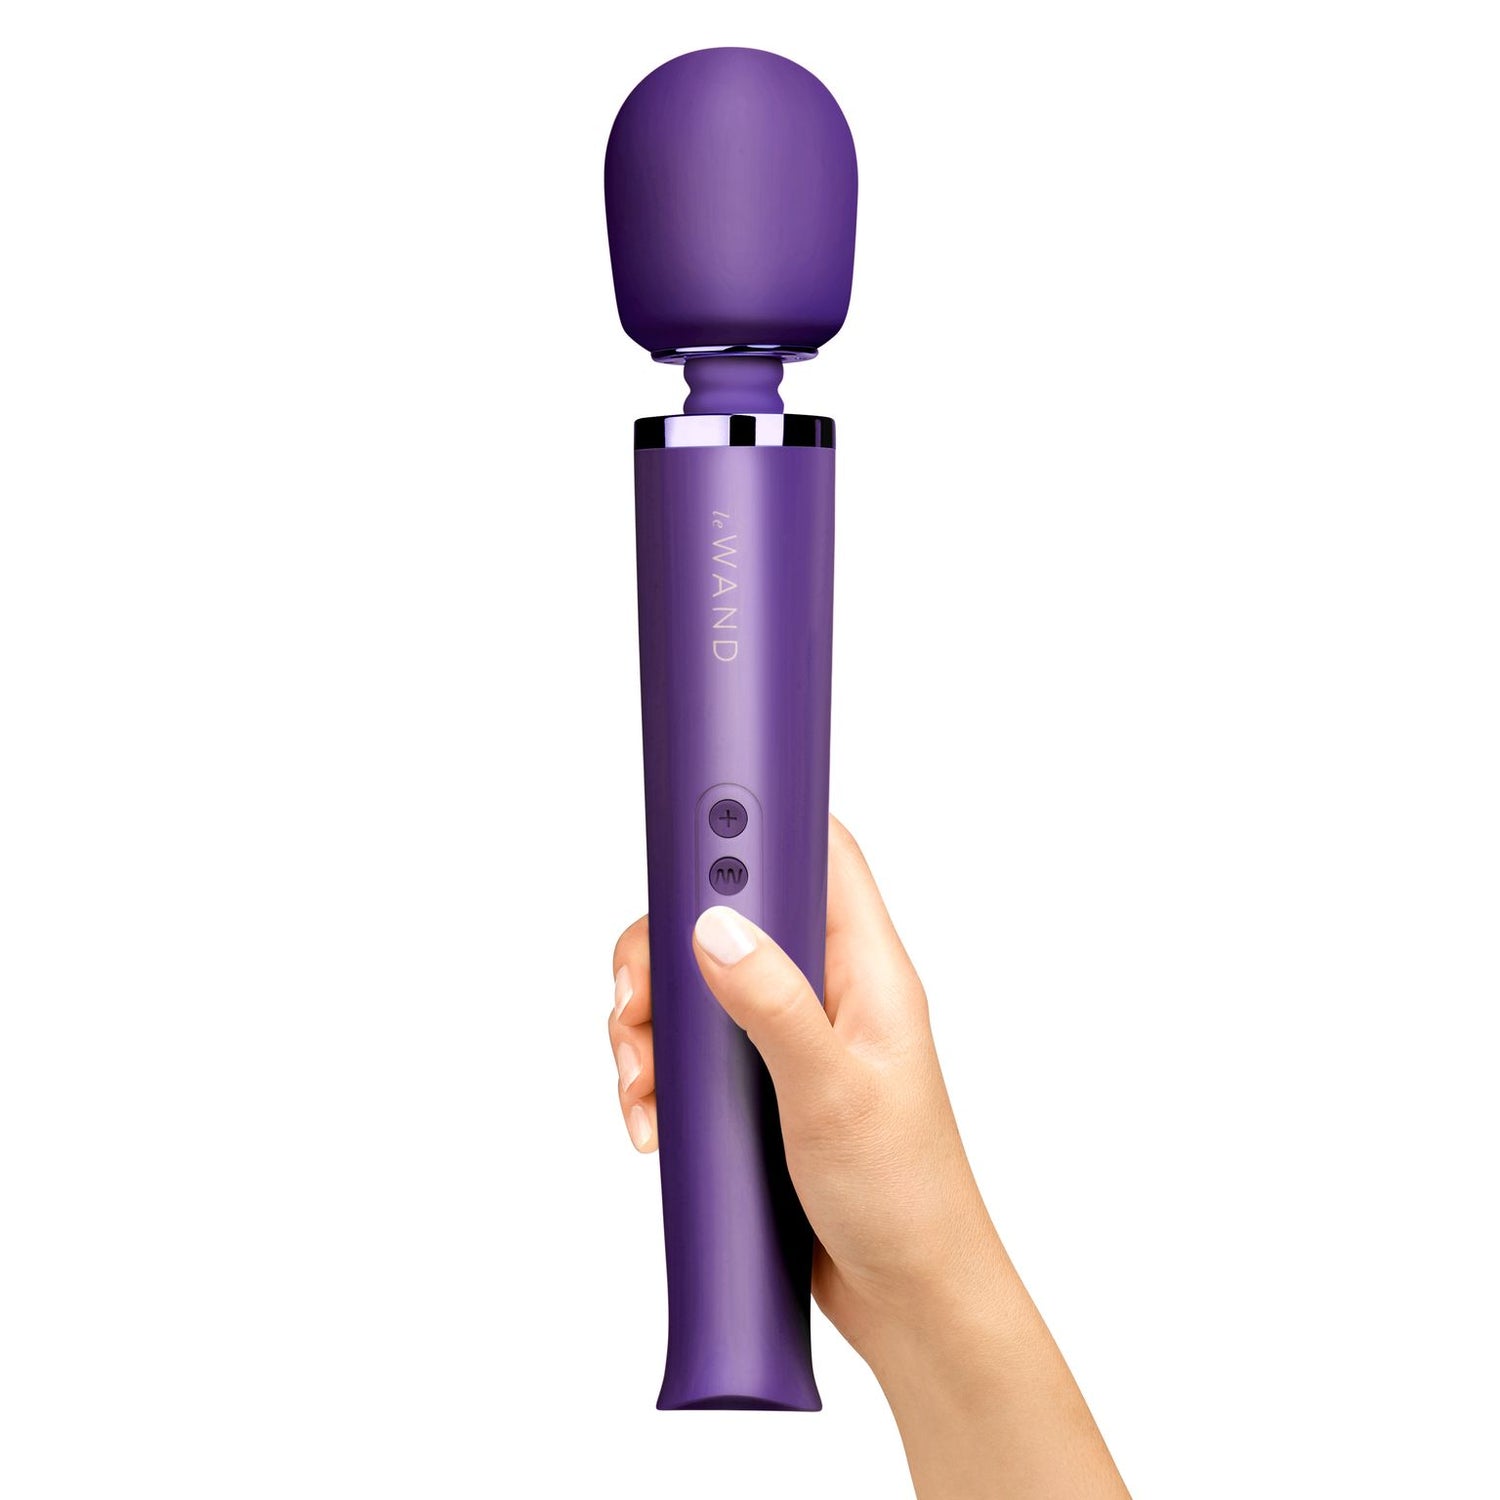 Le Wand Rechargeable Massager - Purple